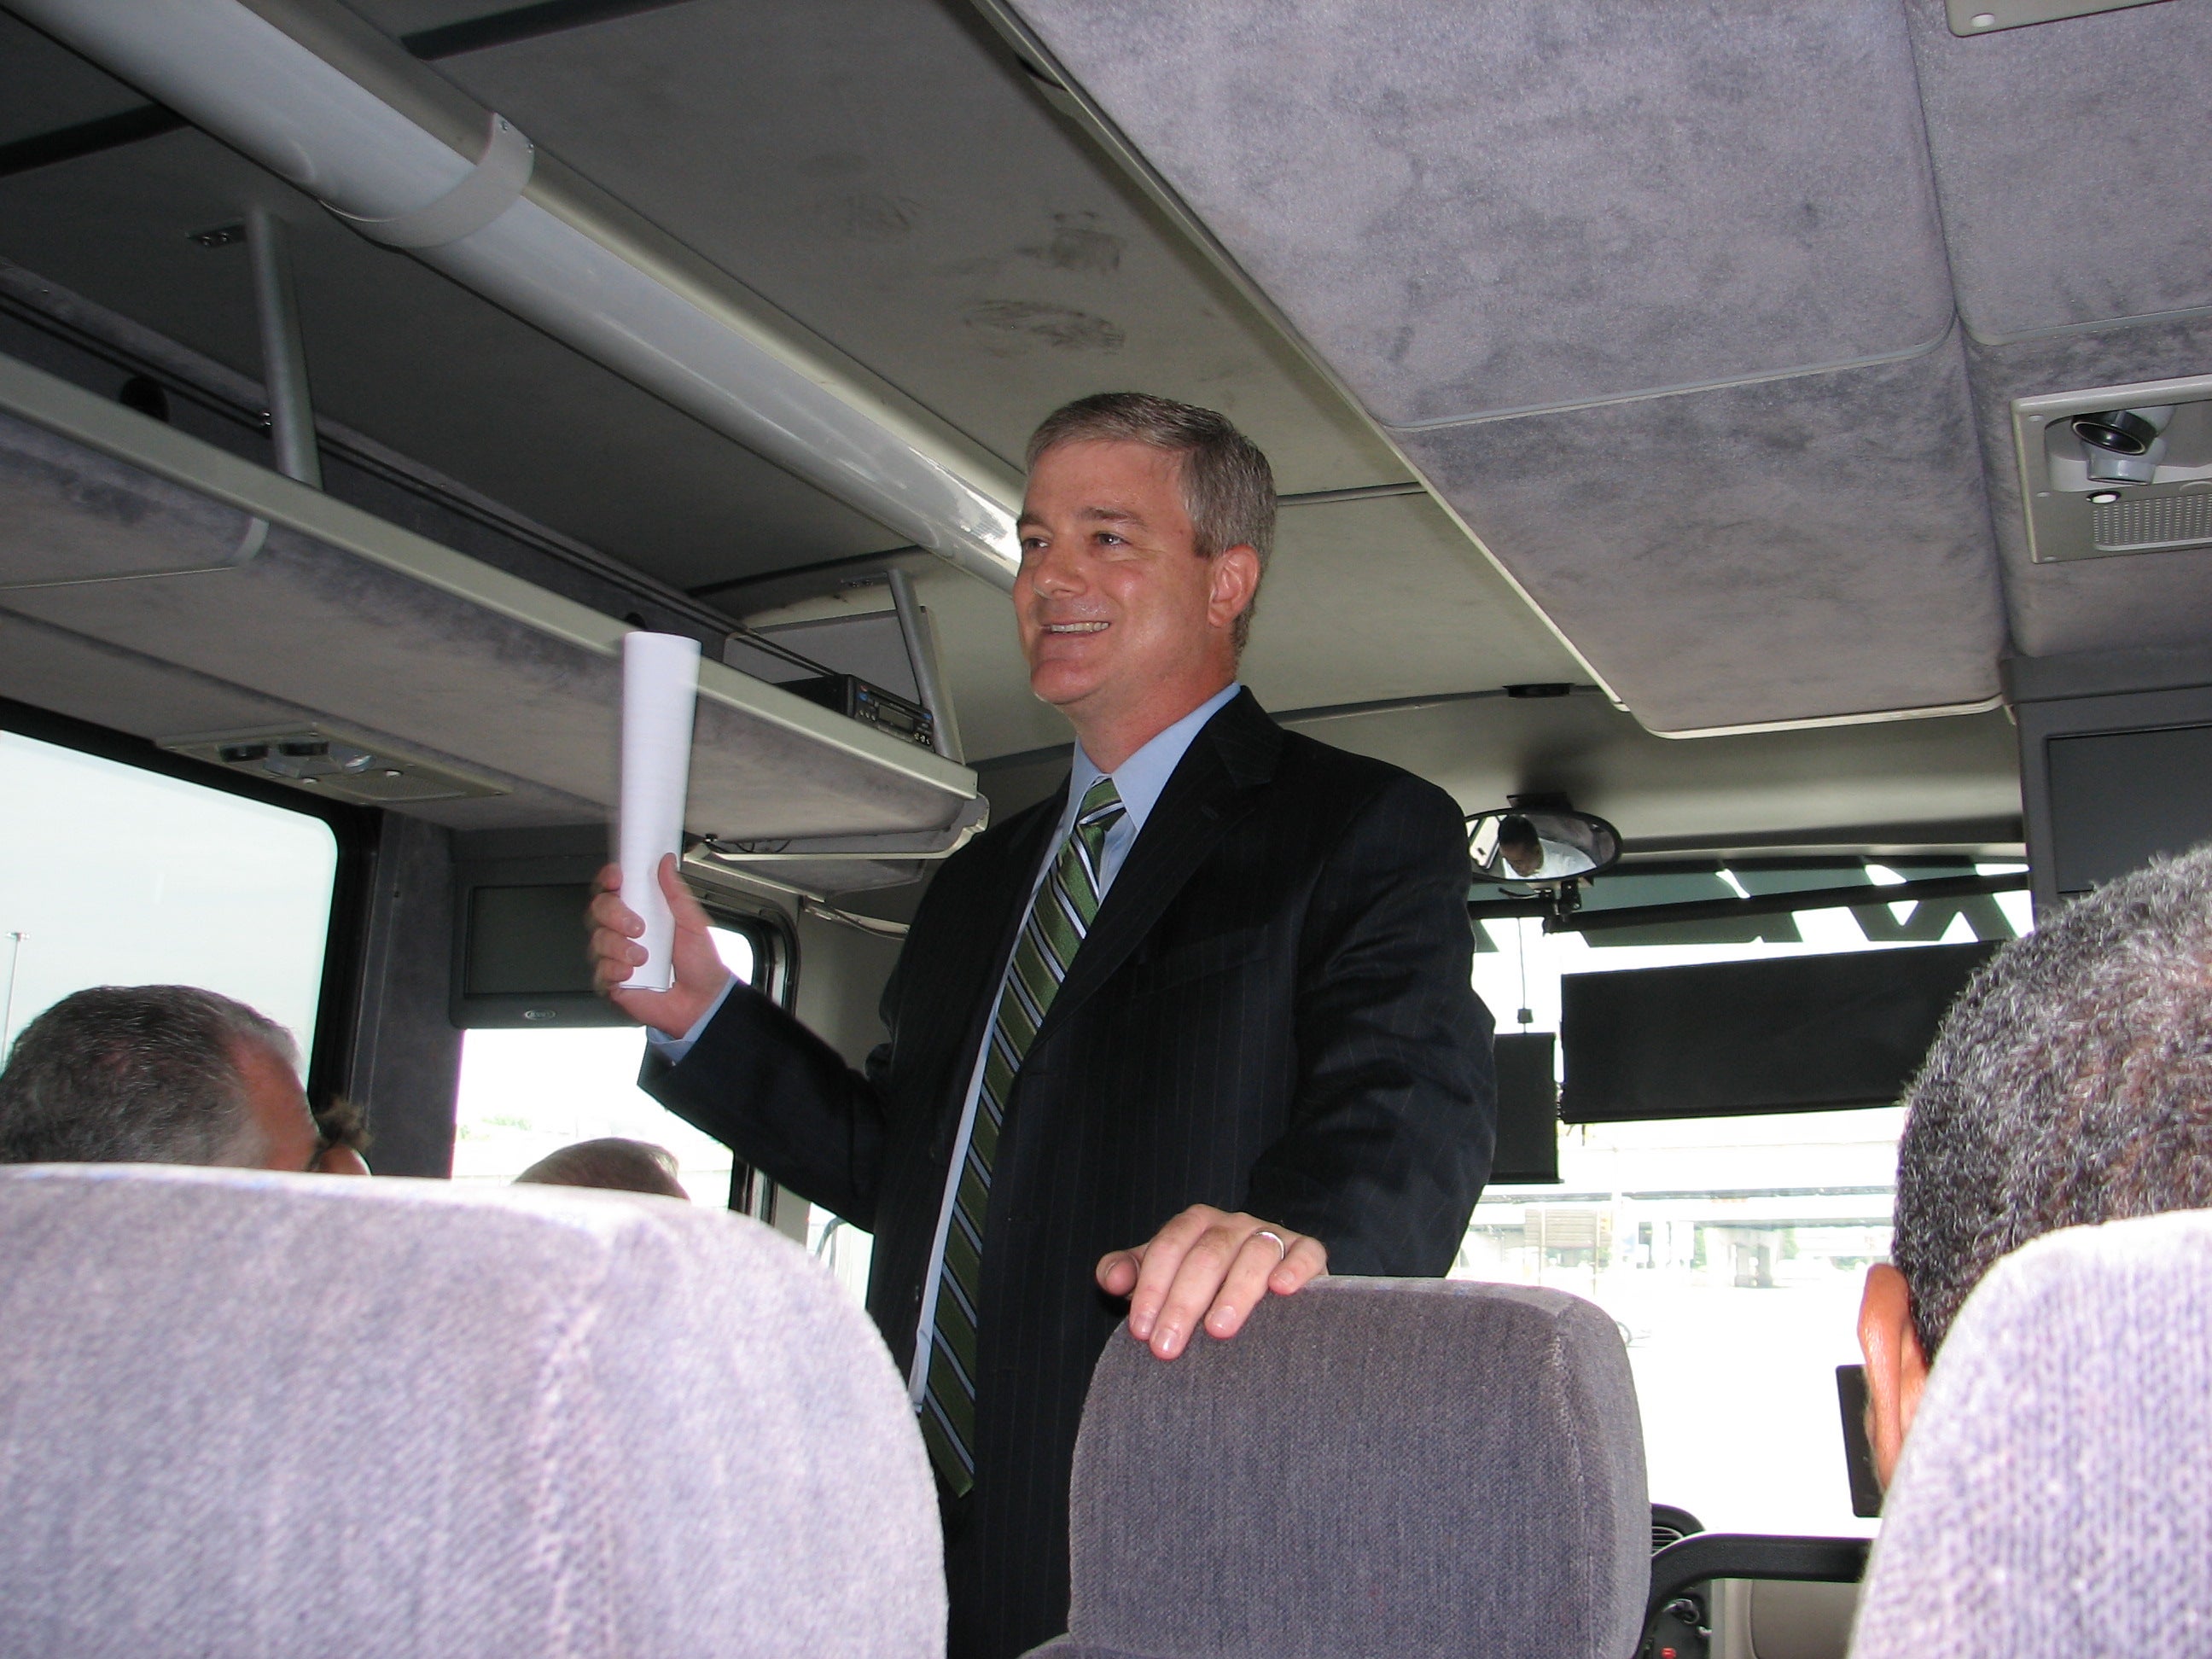 George Bink, executive vice president at Procacci Brothers, leads a media tour